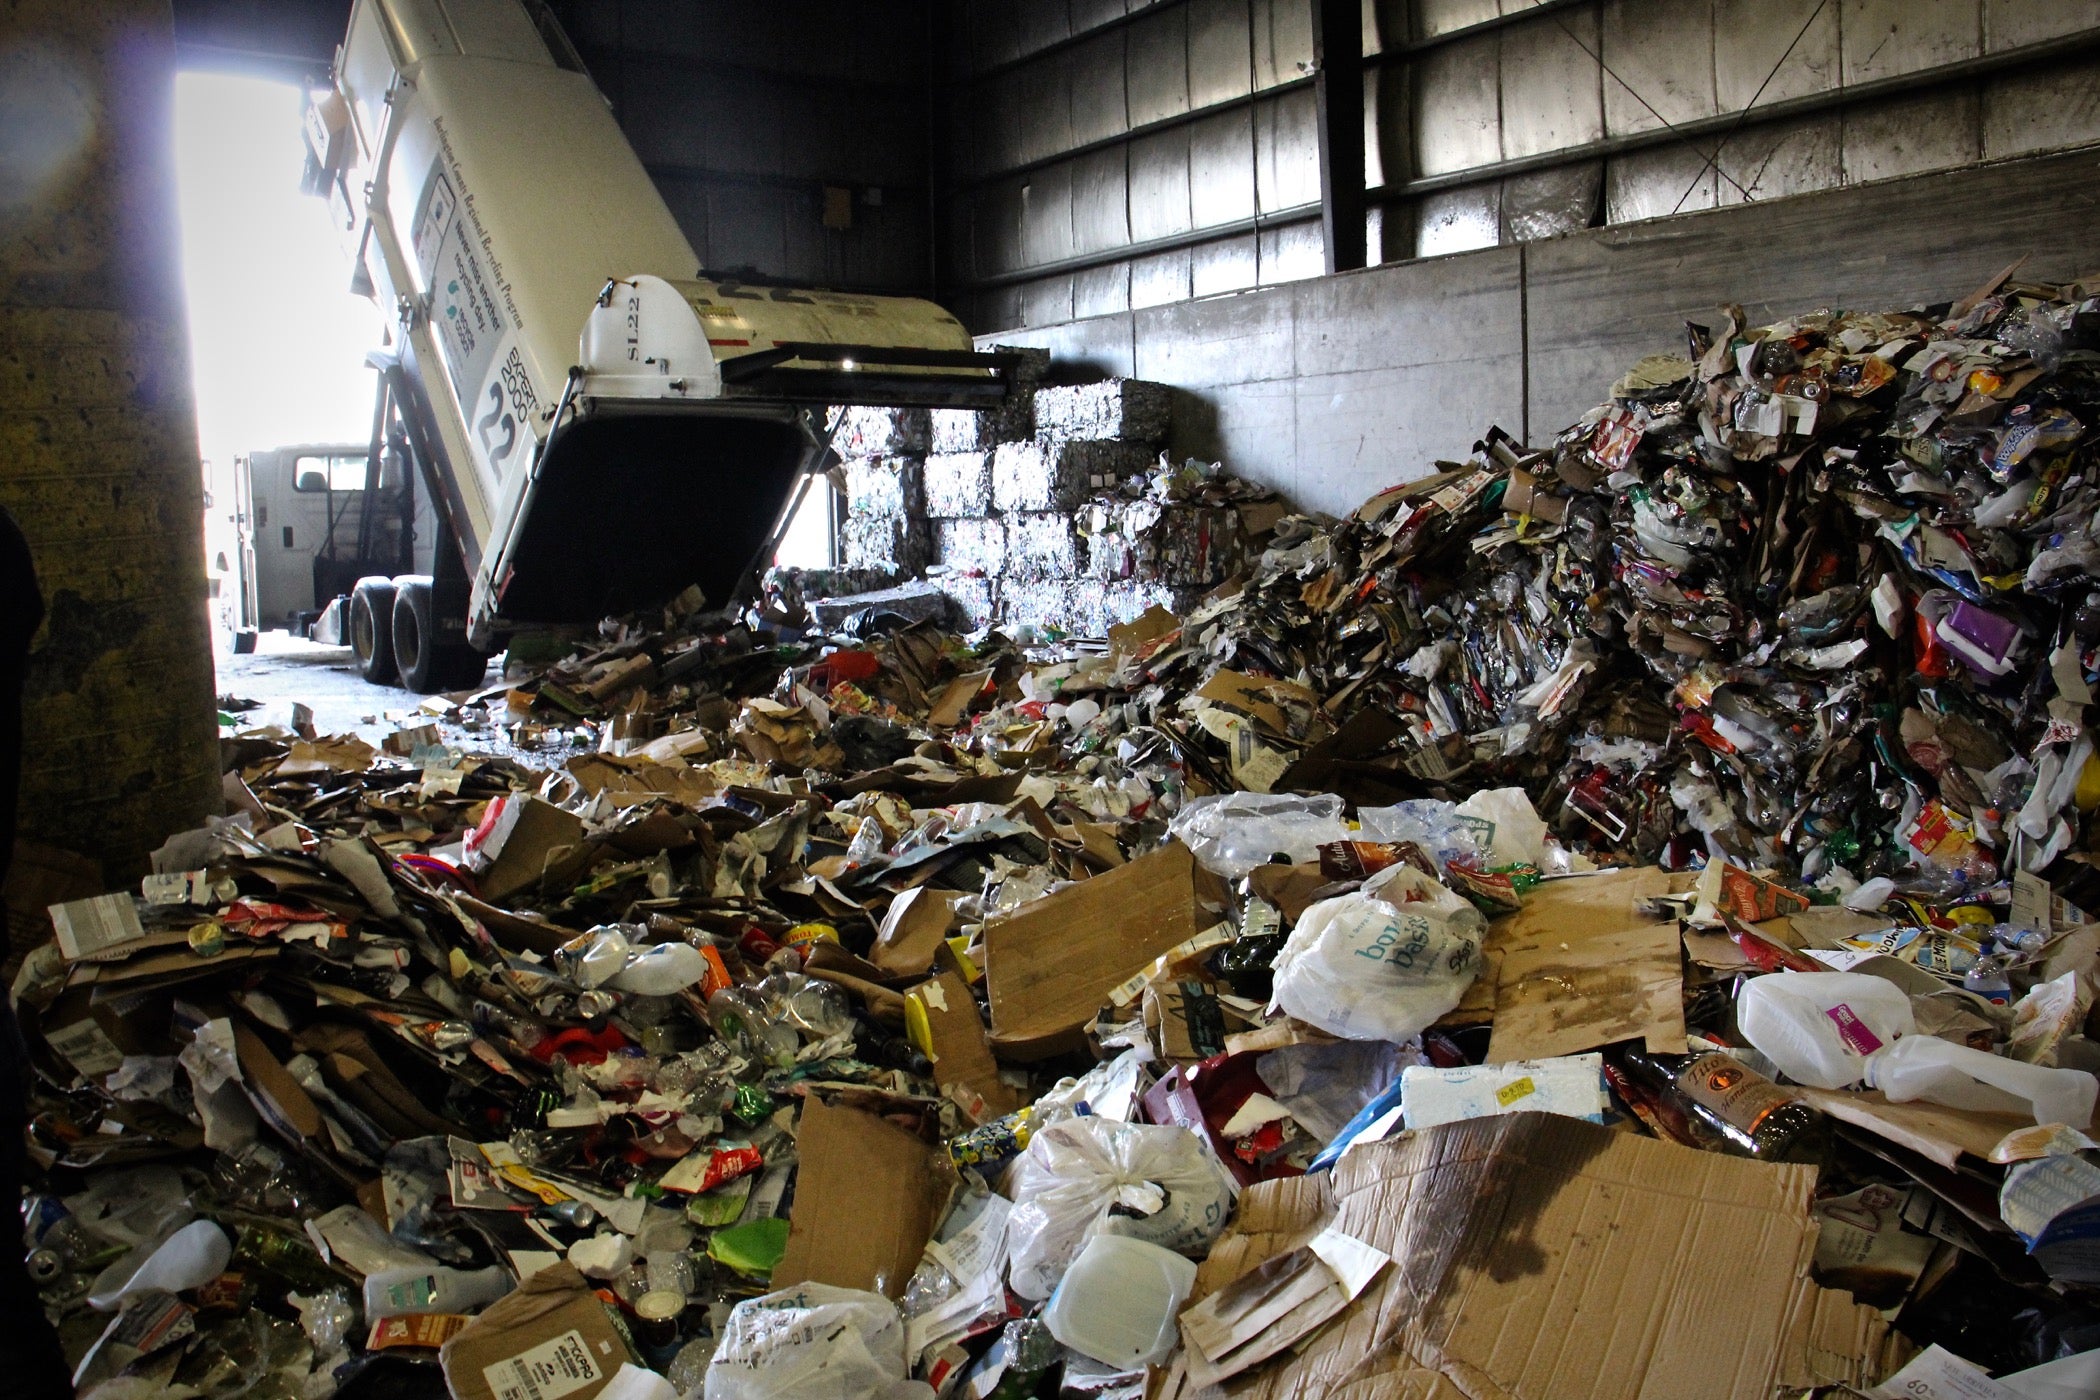 The interior of a Burlington County recycling plant in Westampton, N.J